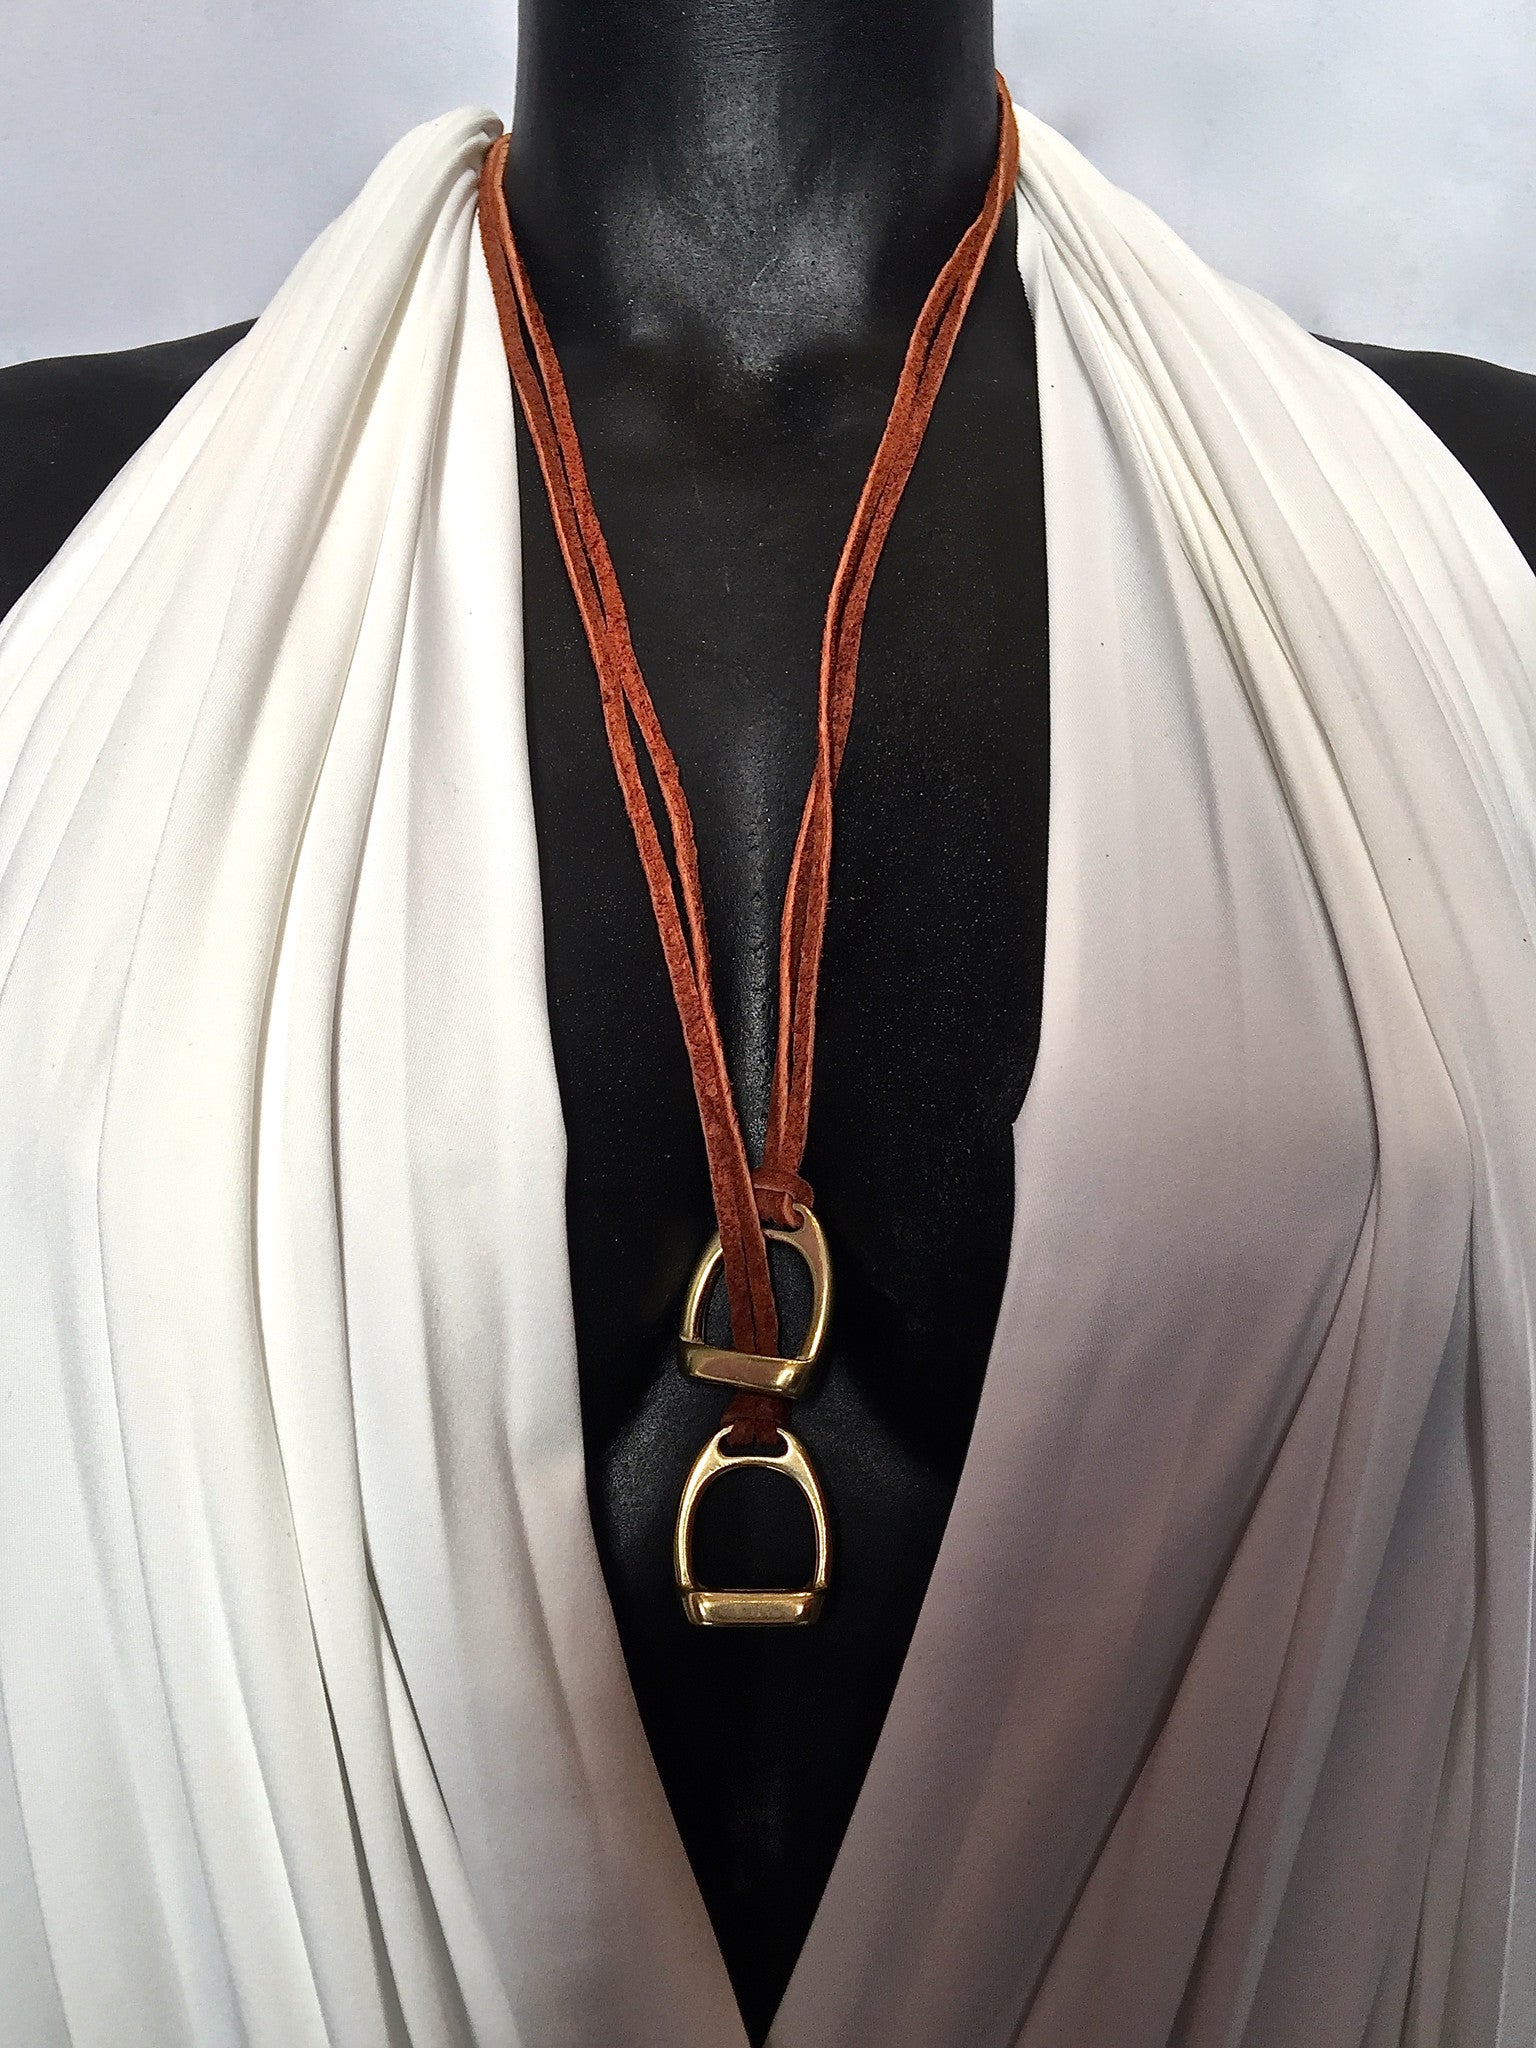 Double Stirrup Suede Necklace by nyet jewelry.